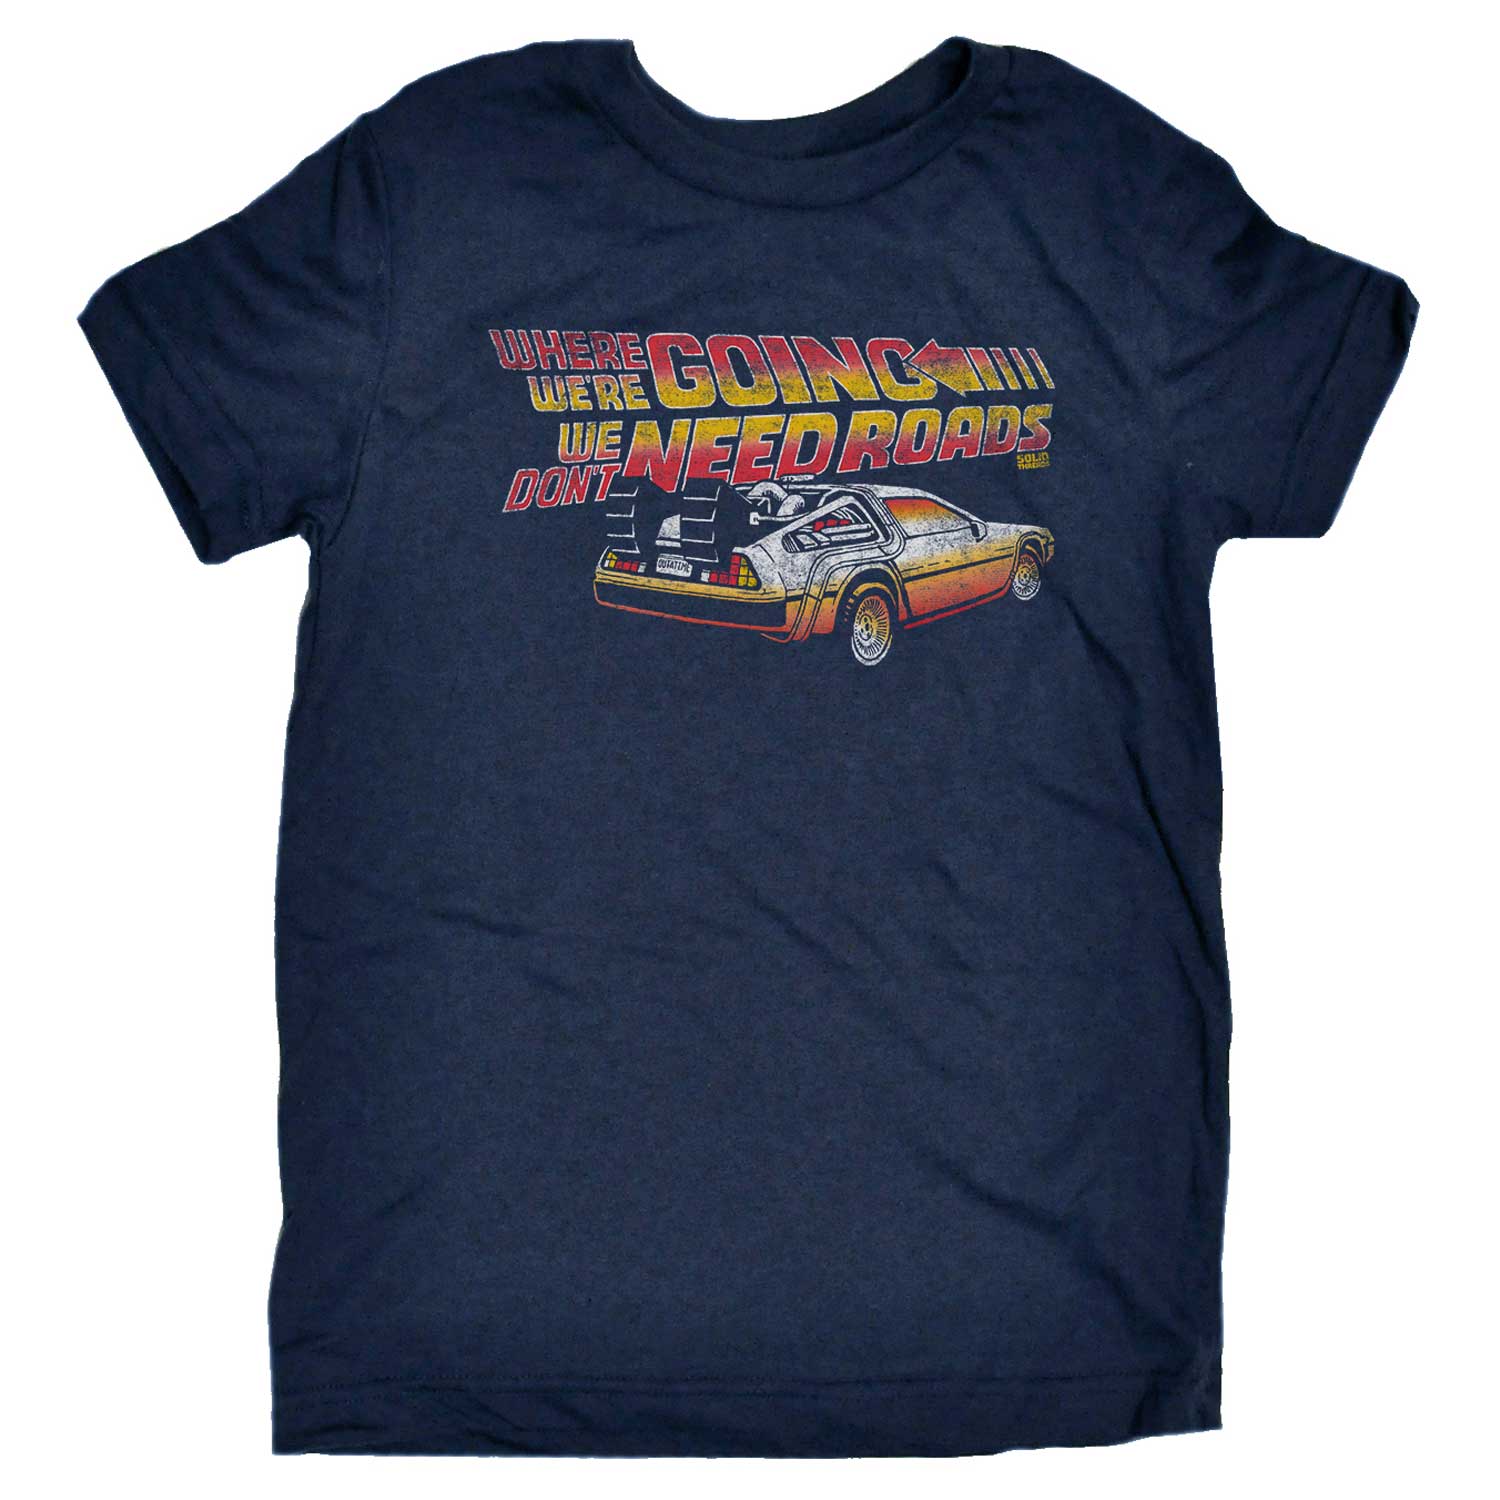 Kid's Need Roads Retro Back to the Future Graphic Tee | Cute 80s Movie Youth T-shirt | Solid Threads